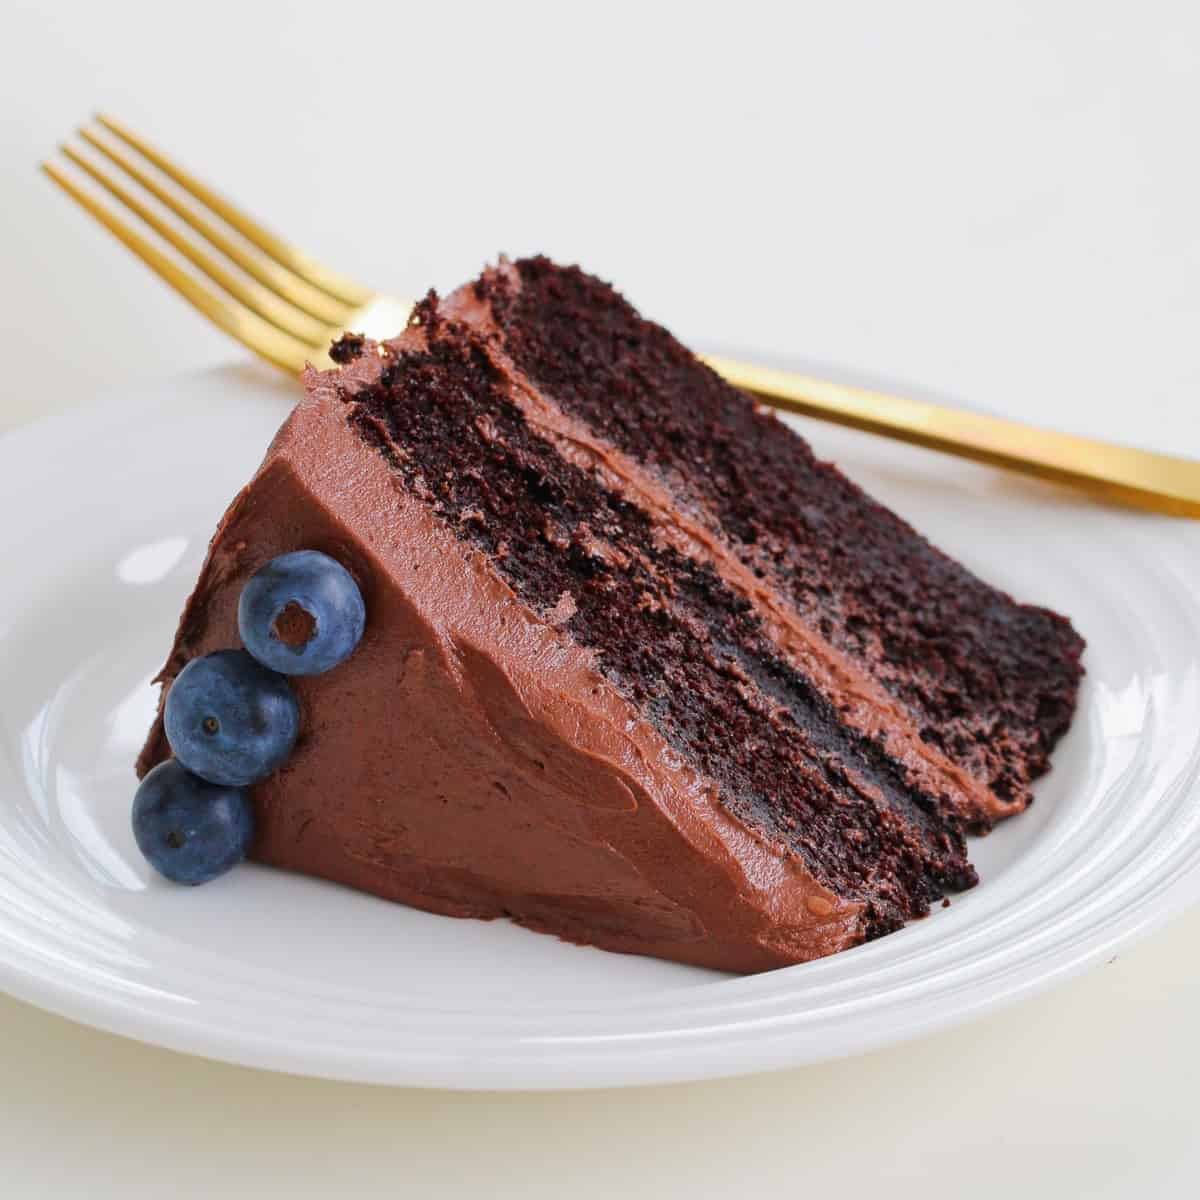 A slice of rich mud cake with chocolate frosting and blueberries on a white plate.